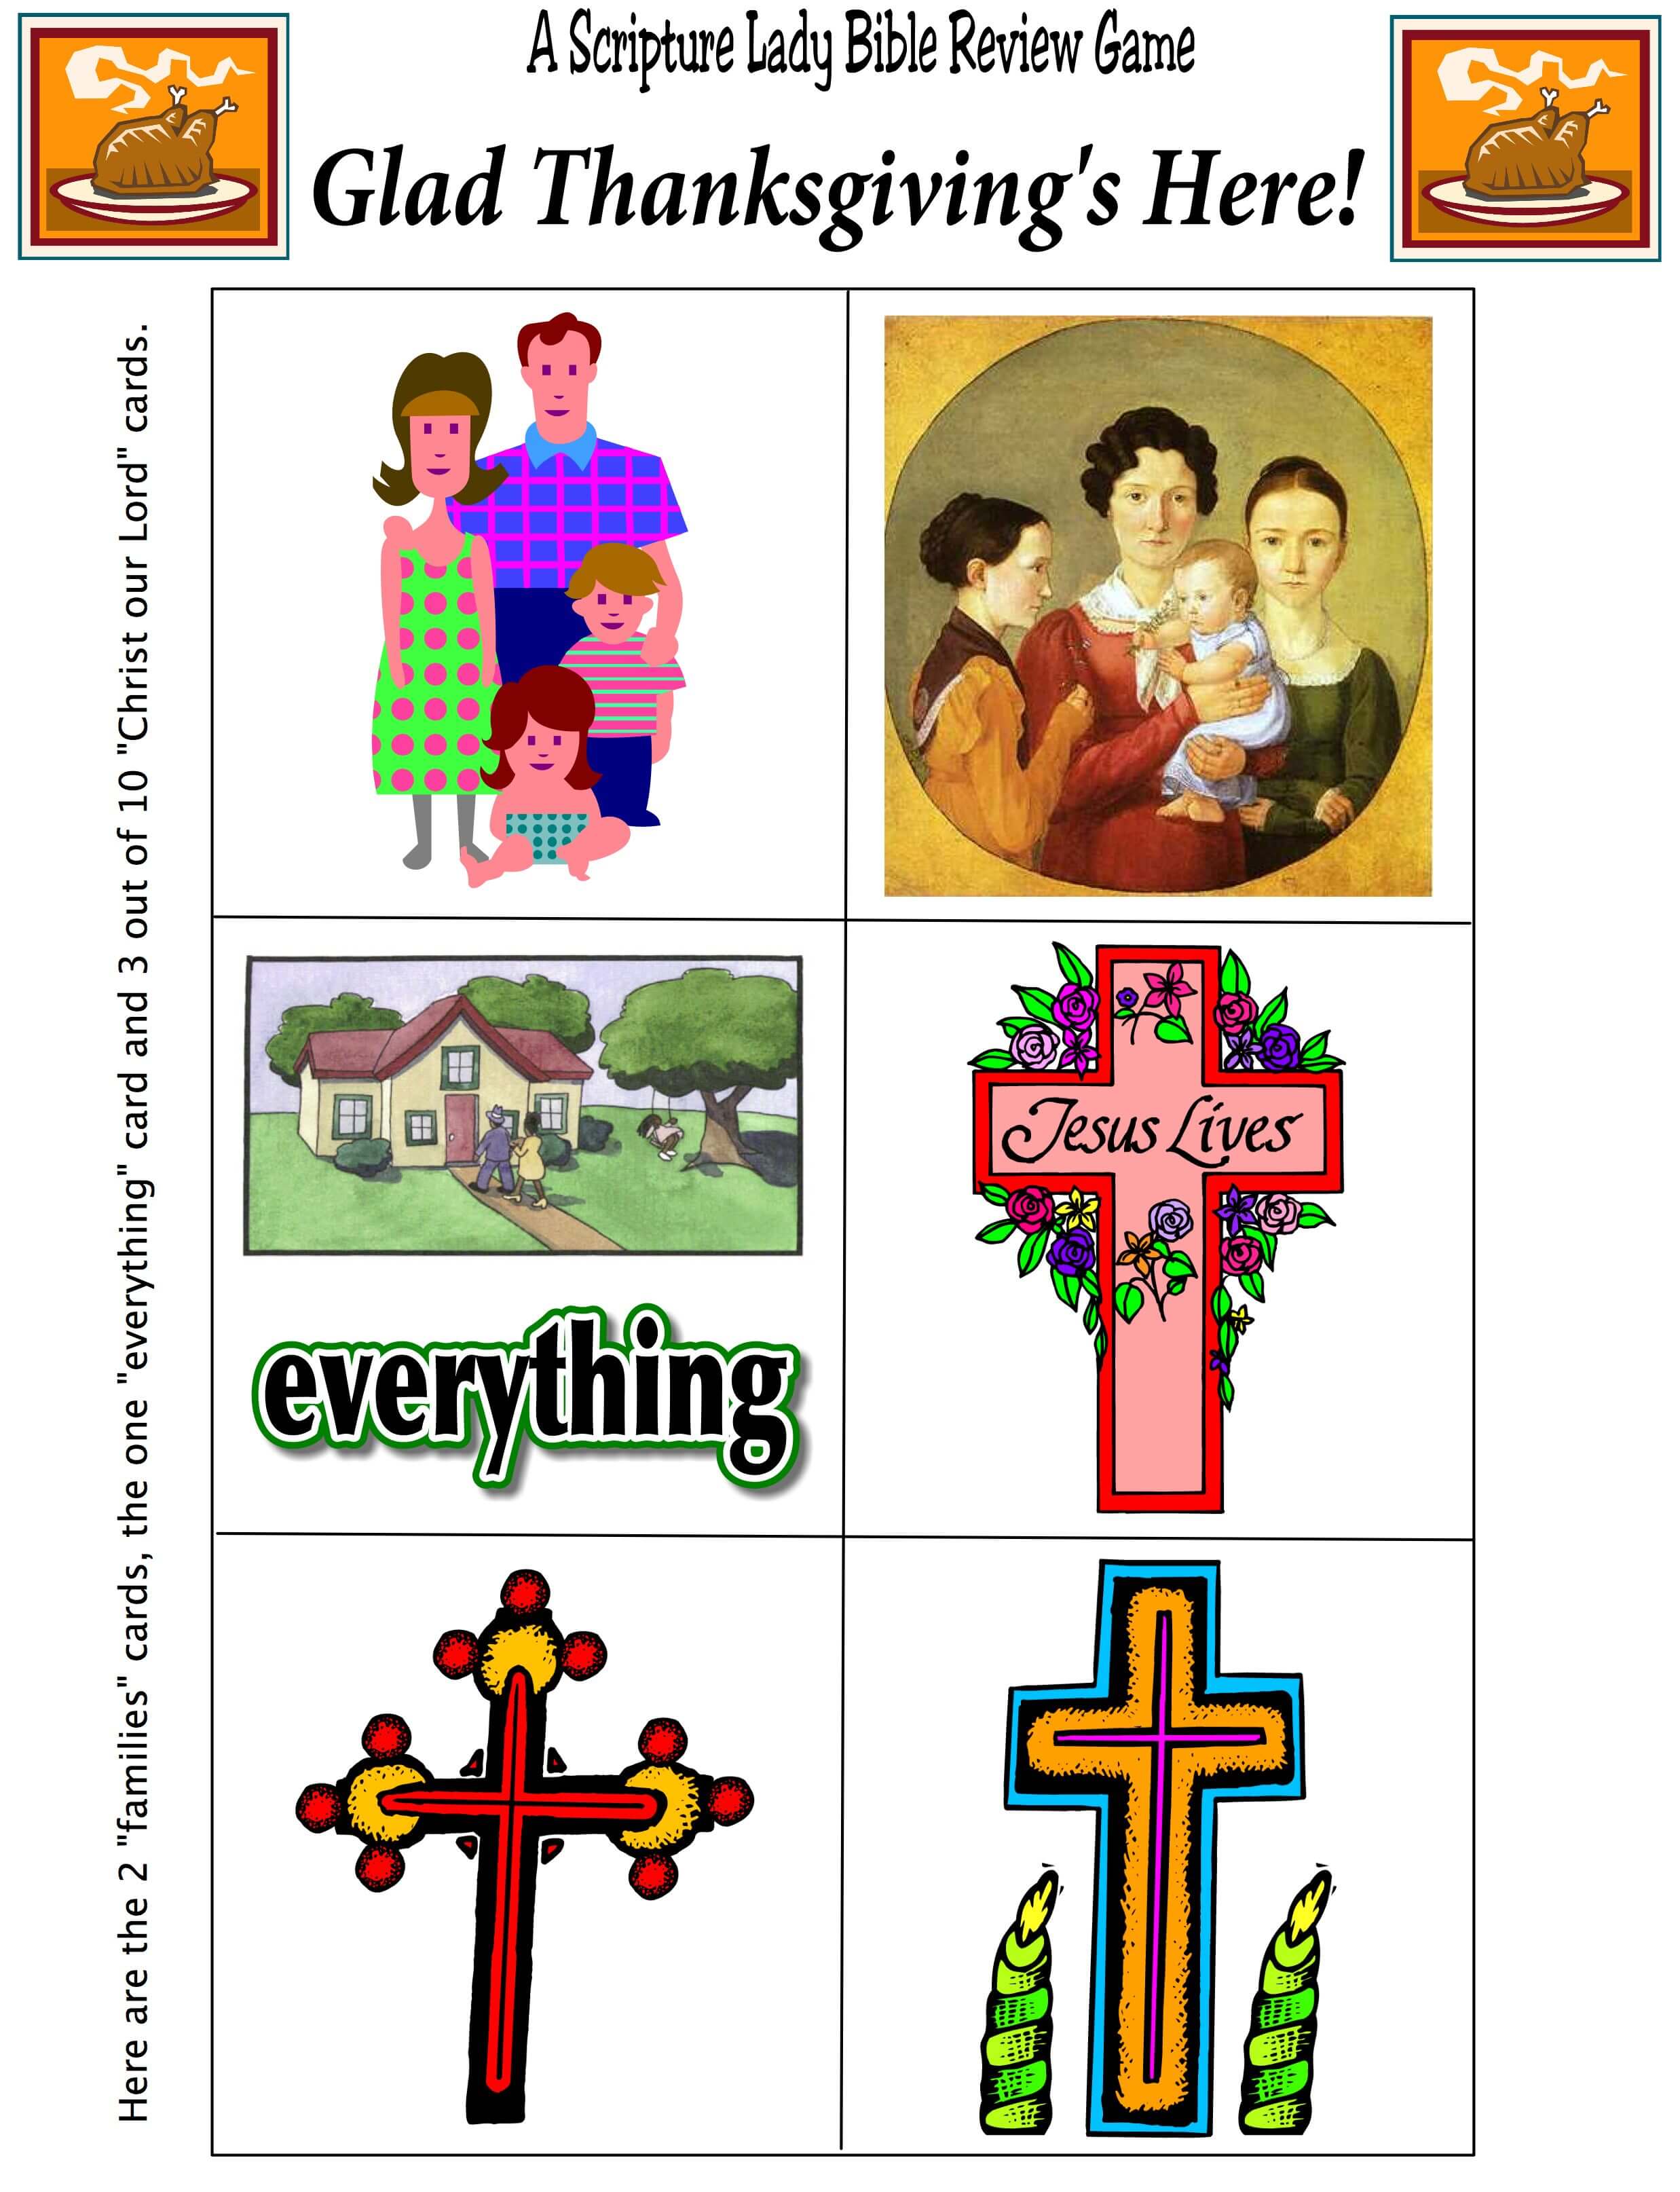 Scripture Lady's Holiday Bible Games: Glad Thanksgiving's Here - Thanksgiving Bible Games For Preschoolers